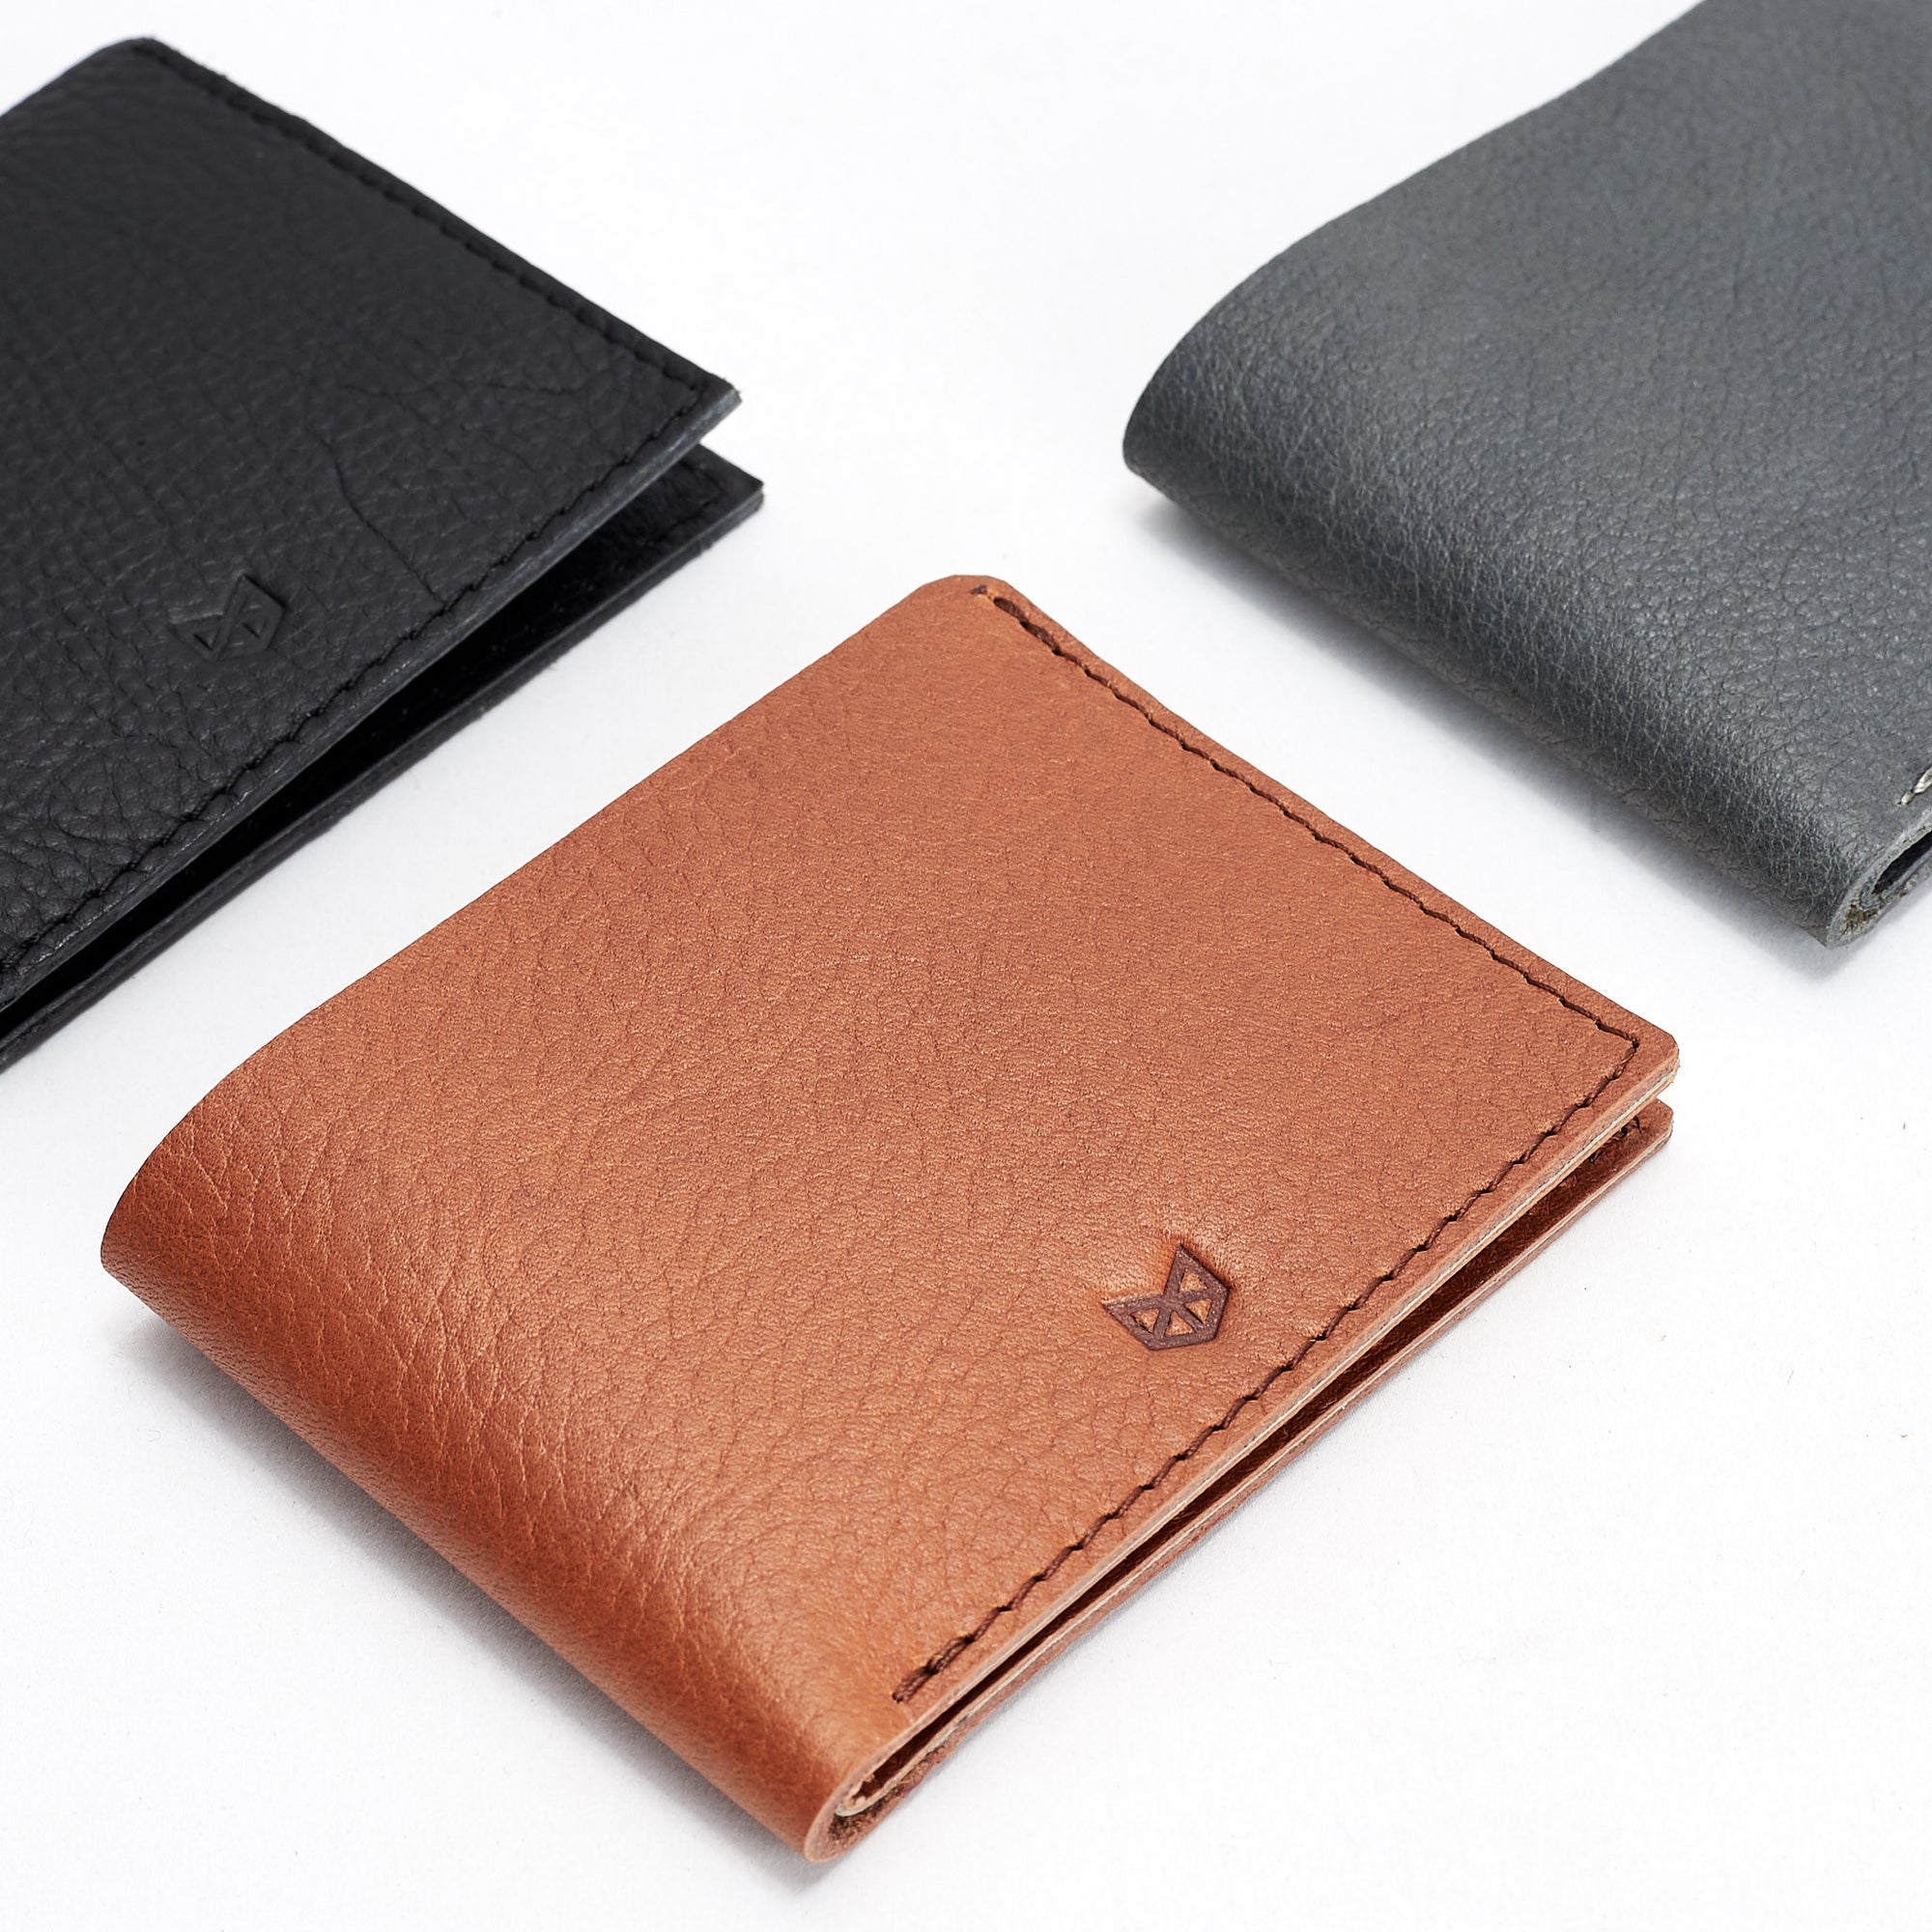 Style. Light brown leather slim wallet gifts for men handmade accessories, designer thin leather wallet for mens gifts 